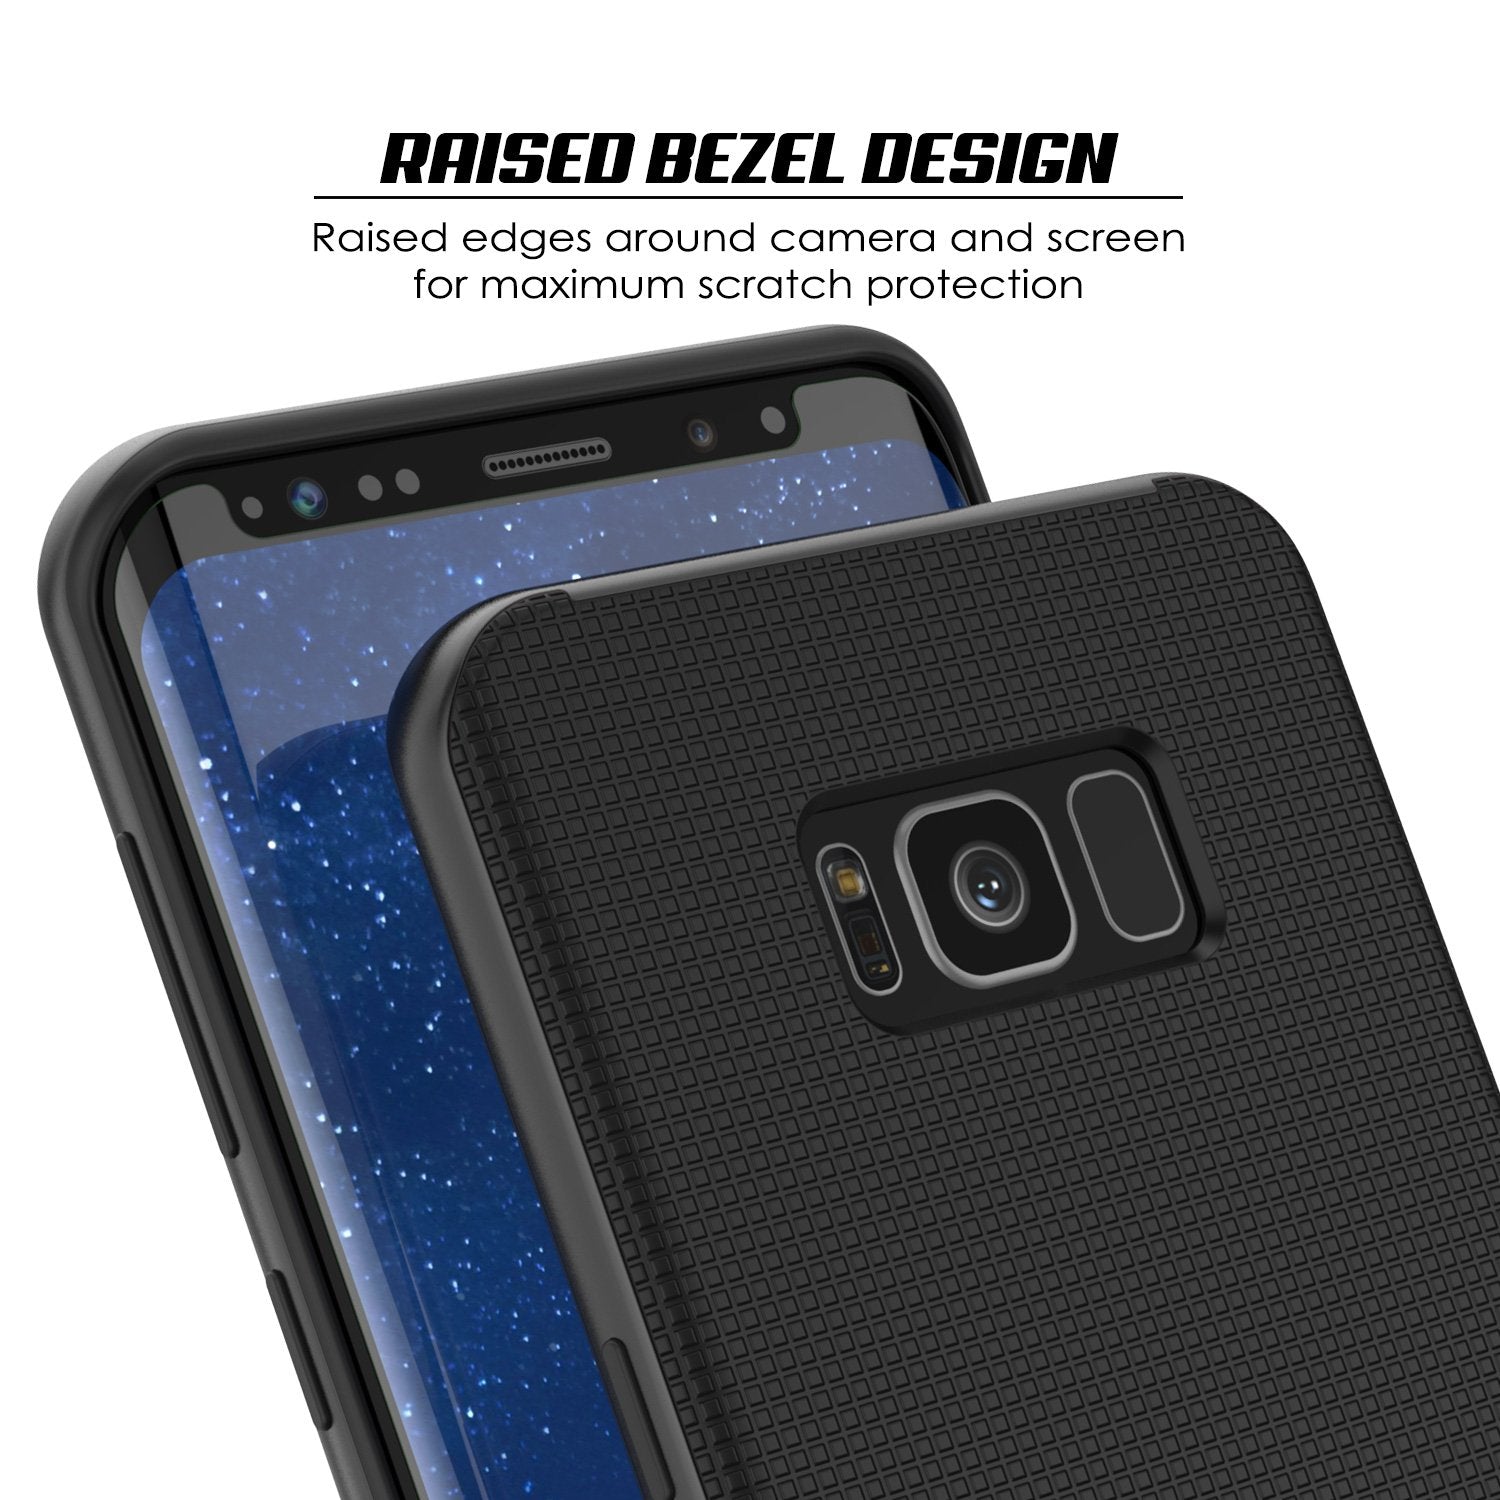 Galaxy S8 Plus Case, PunkCase Stealth Black Series Hybrid 3-Piece Shockproof Dual Layer Cover